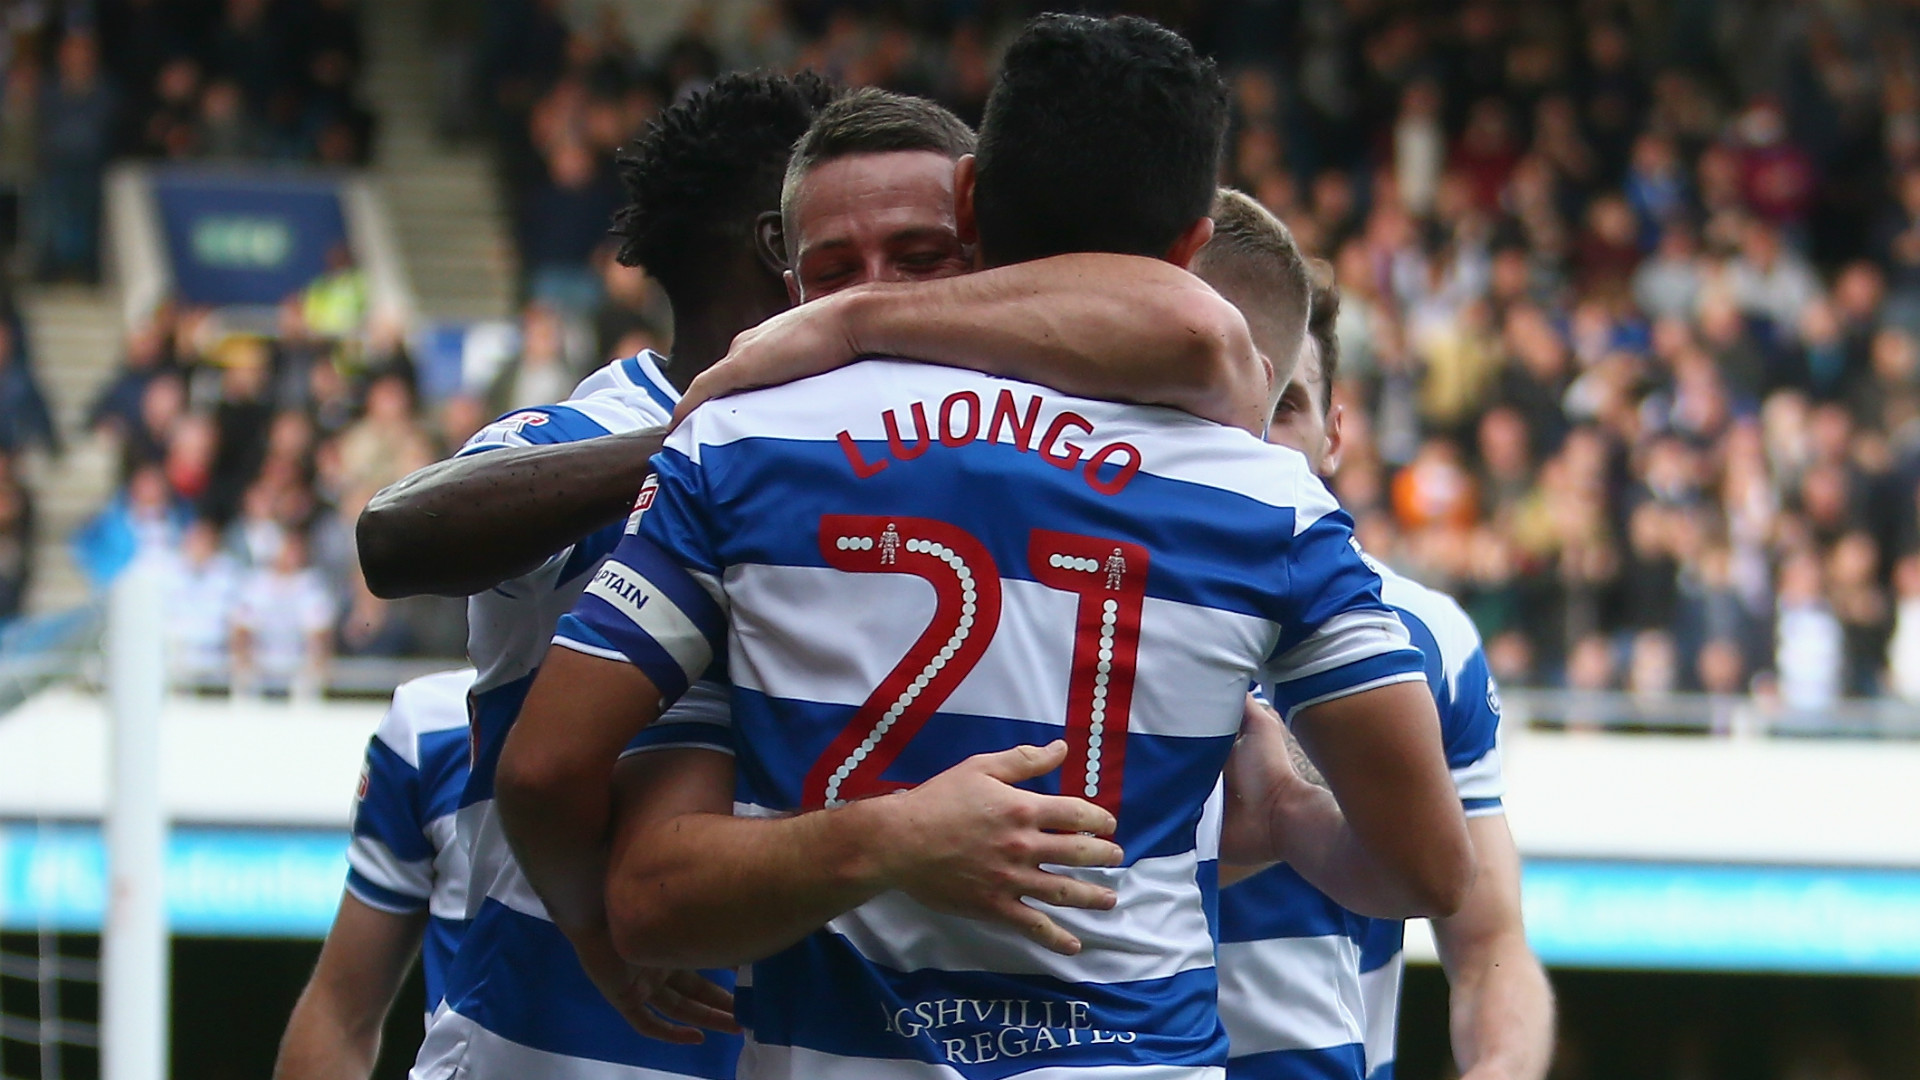 Championship Review: Wolves stay second after QPR loss, misery deepens for Sunderland